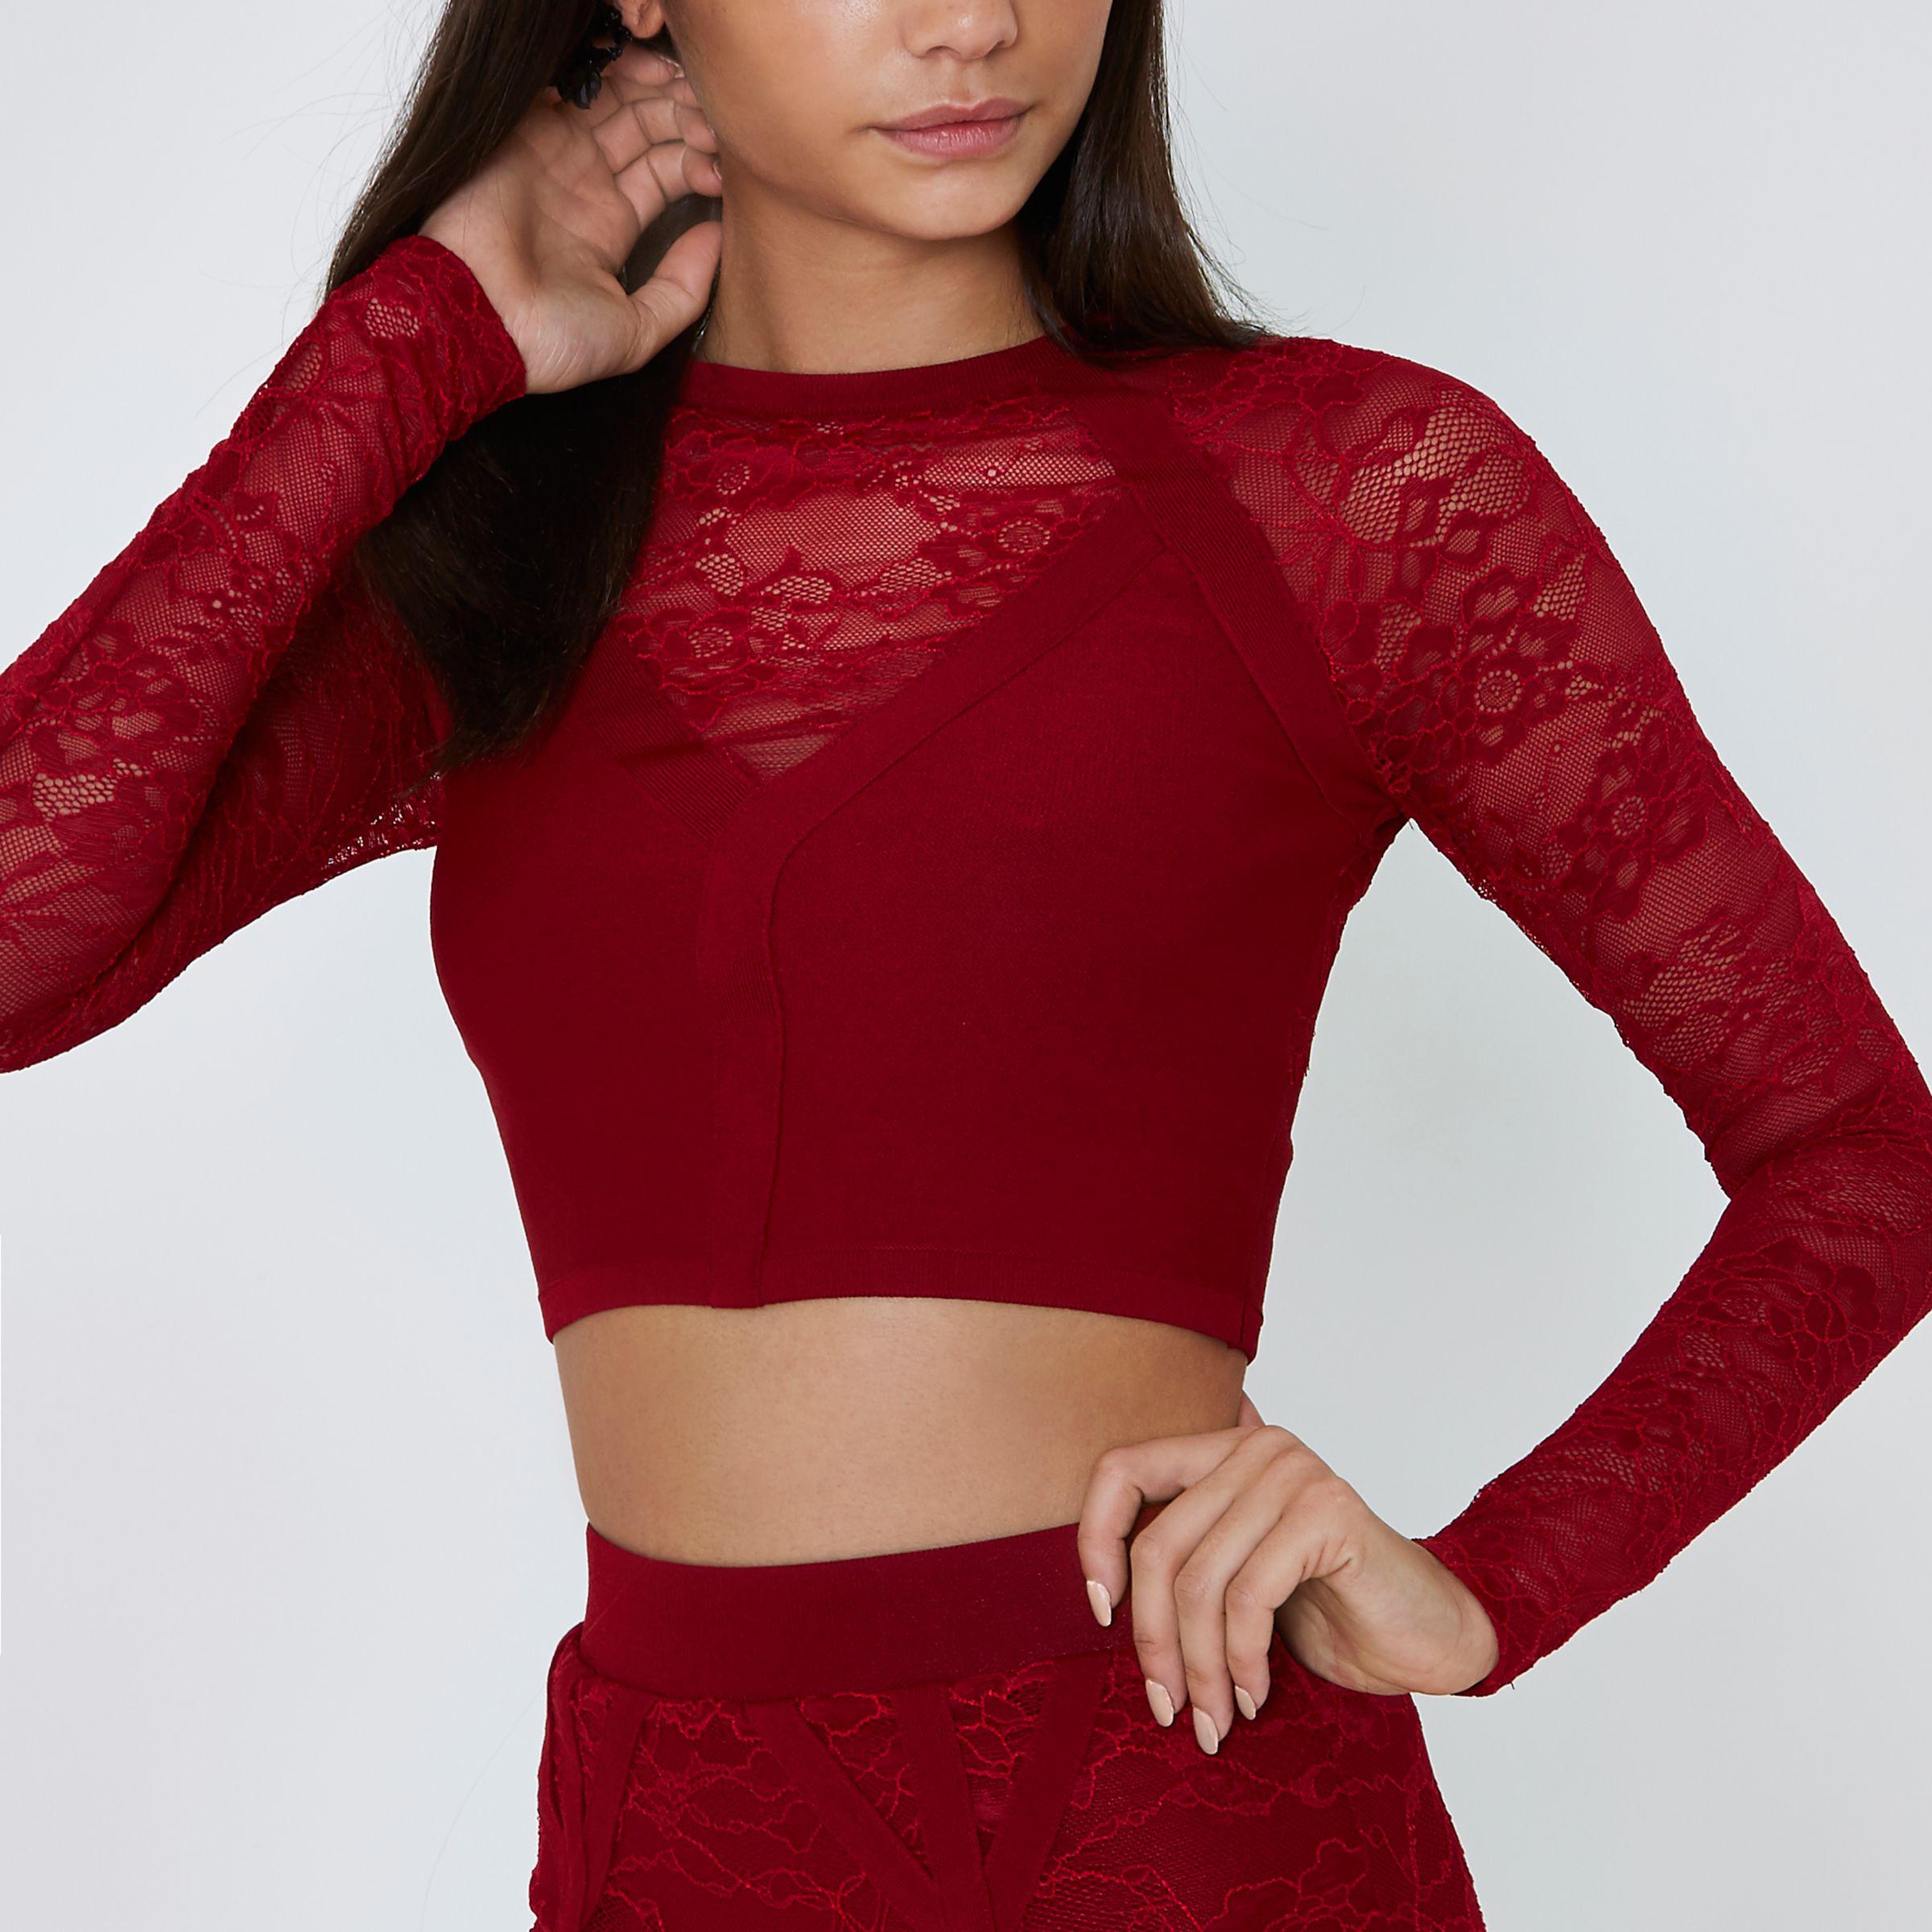 River Island Lace Long Sleeve Crop Top in Red - Lyst